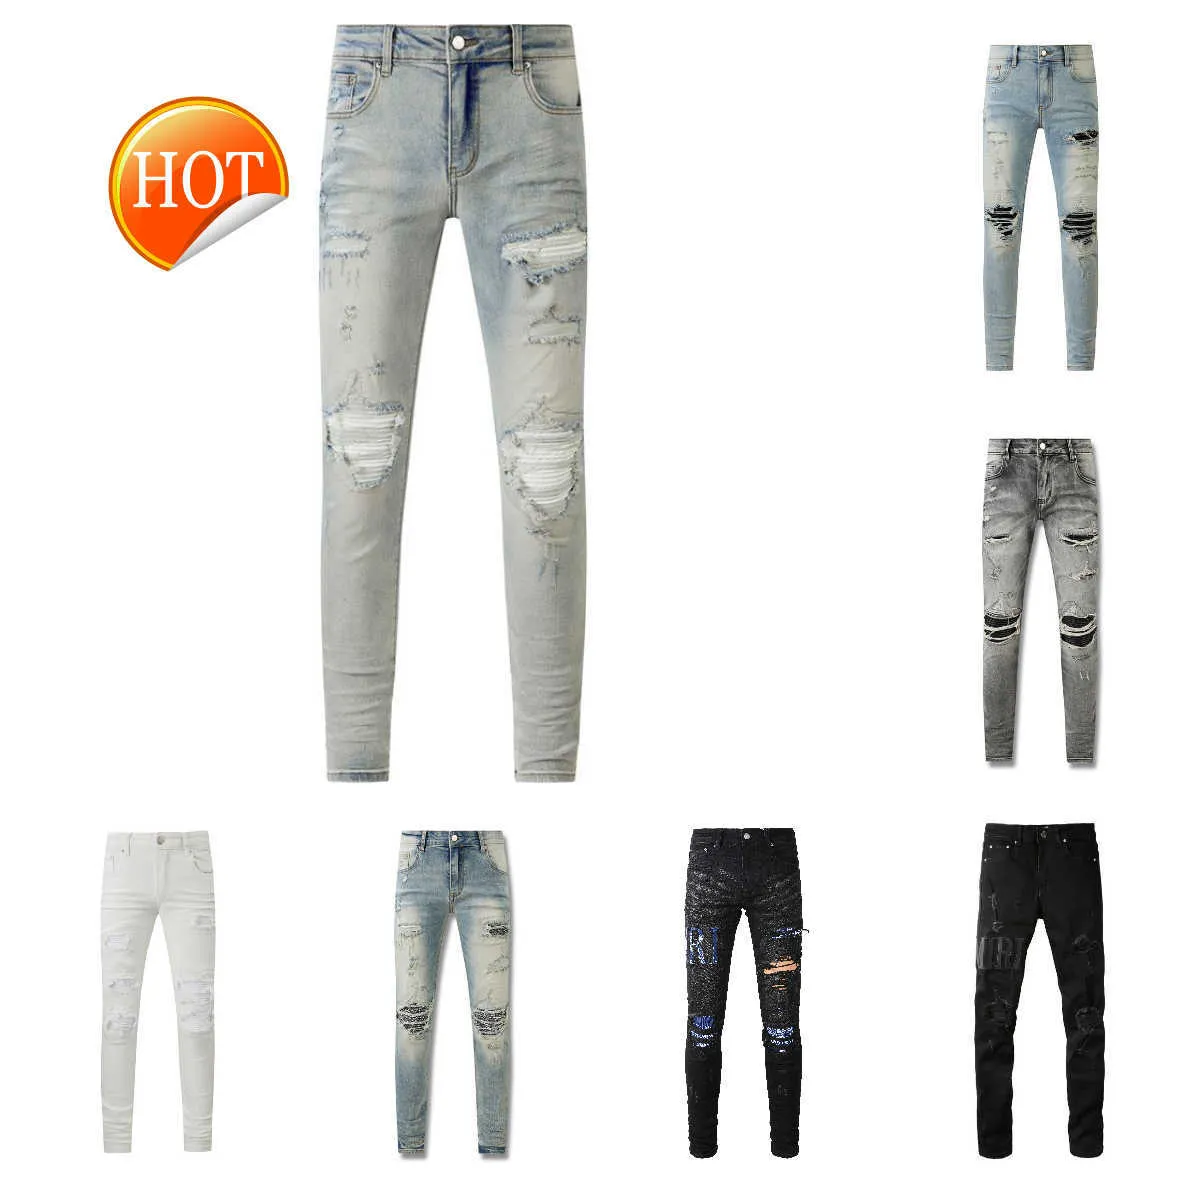 Desginer Purple Jean Pants Jeans Mens Jeans Designer Mens Purple Jeans Straihnt Skiny Zipper Fly White Letter Casual Softener Midweight Daily Outfit High Quality Kk